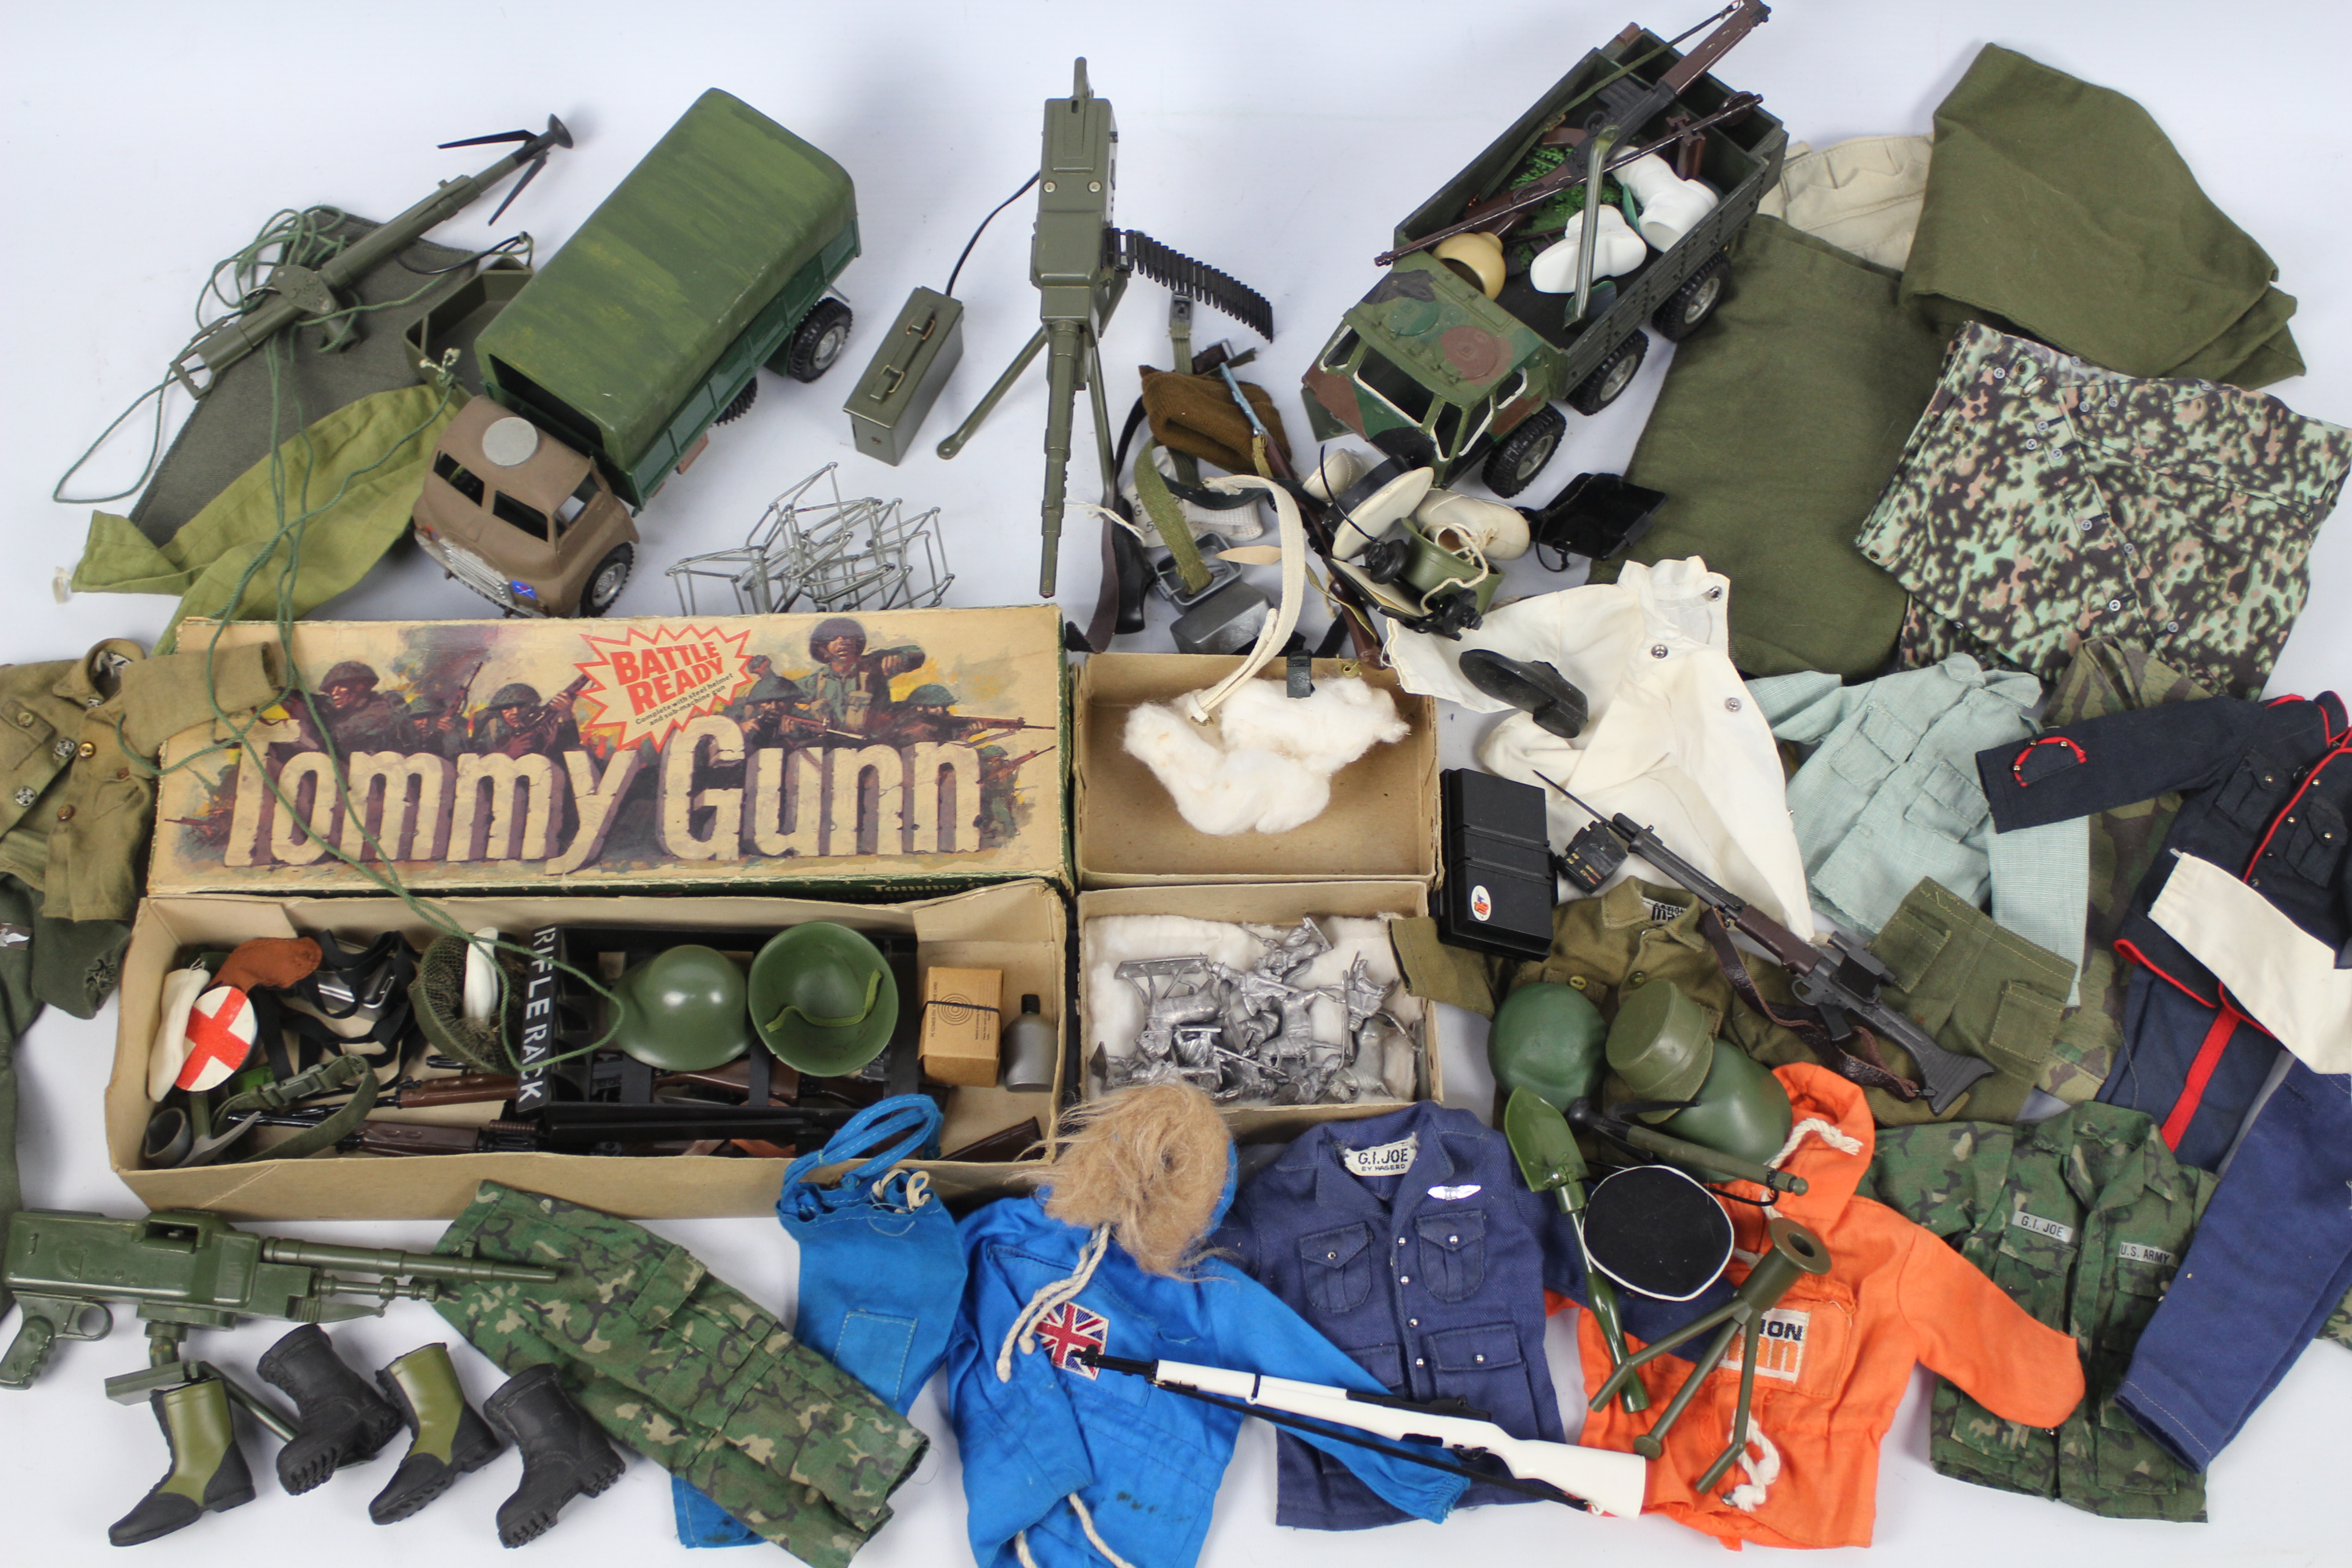 Palitoy - Hasbro - Action Man - GI Joe -Tommy Gunn - Others - A loose collection of Action Man,